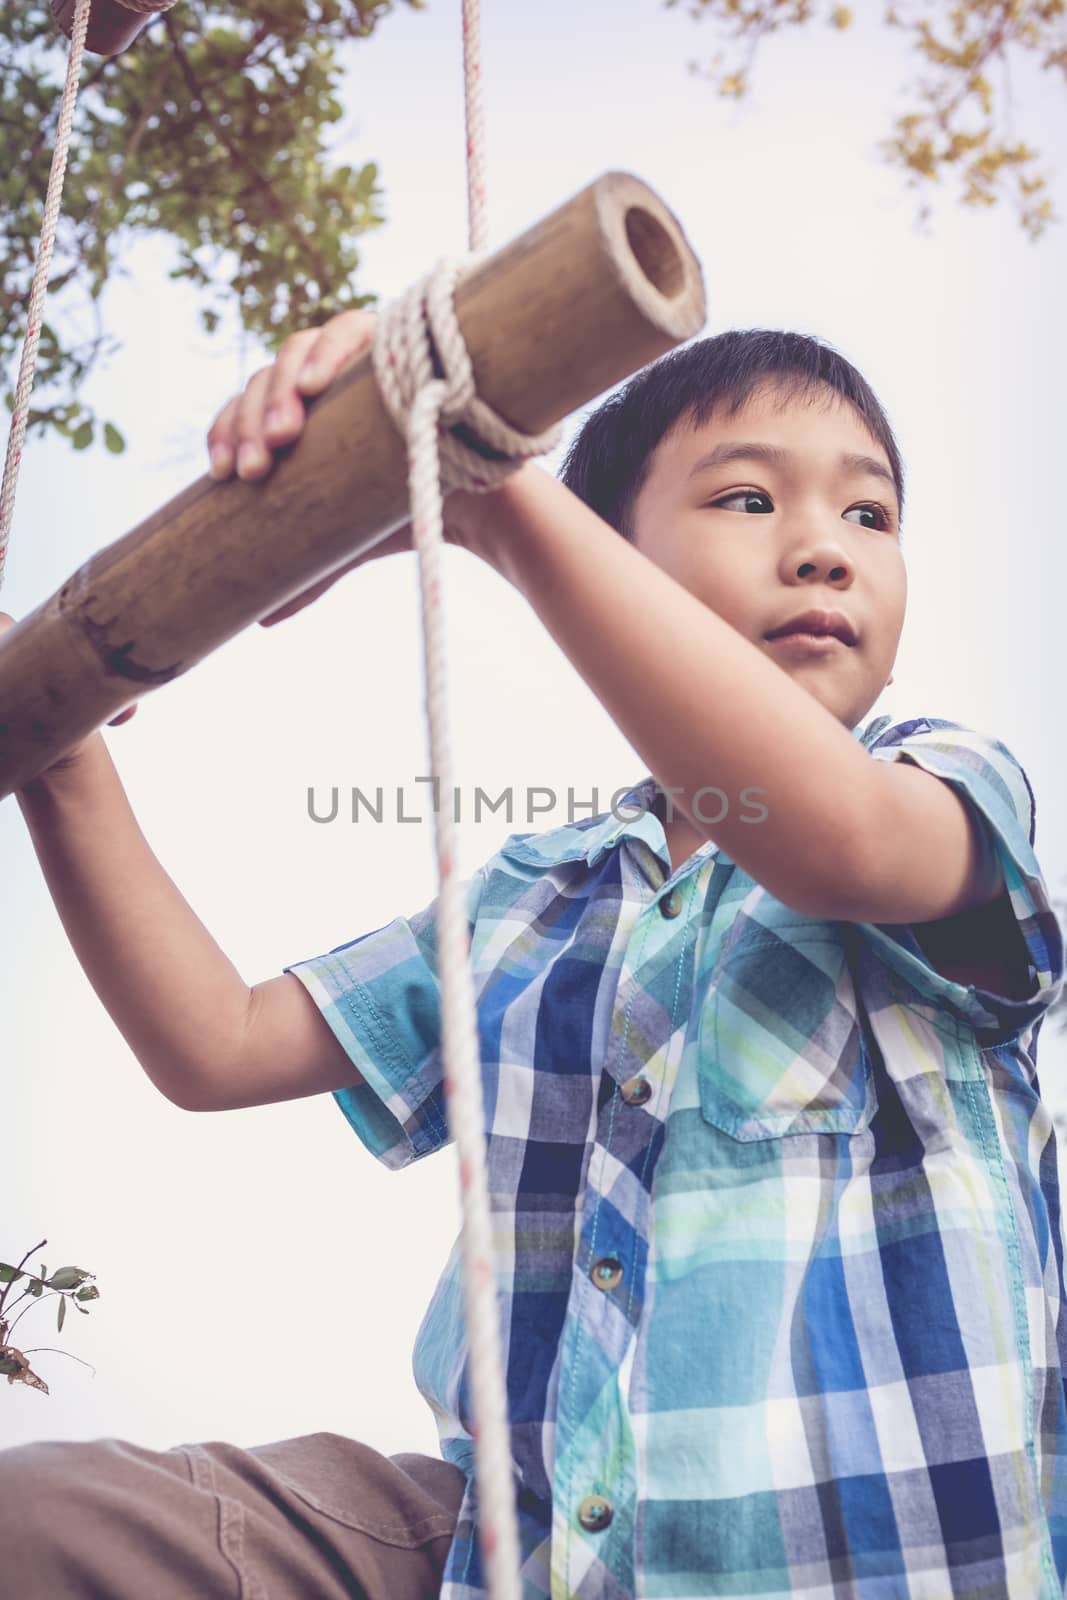 Handsome asian boy climbing on rope ladder made of wood. Child playing outdoors. Travel and adventure concept. Vintage style.